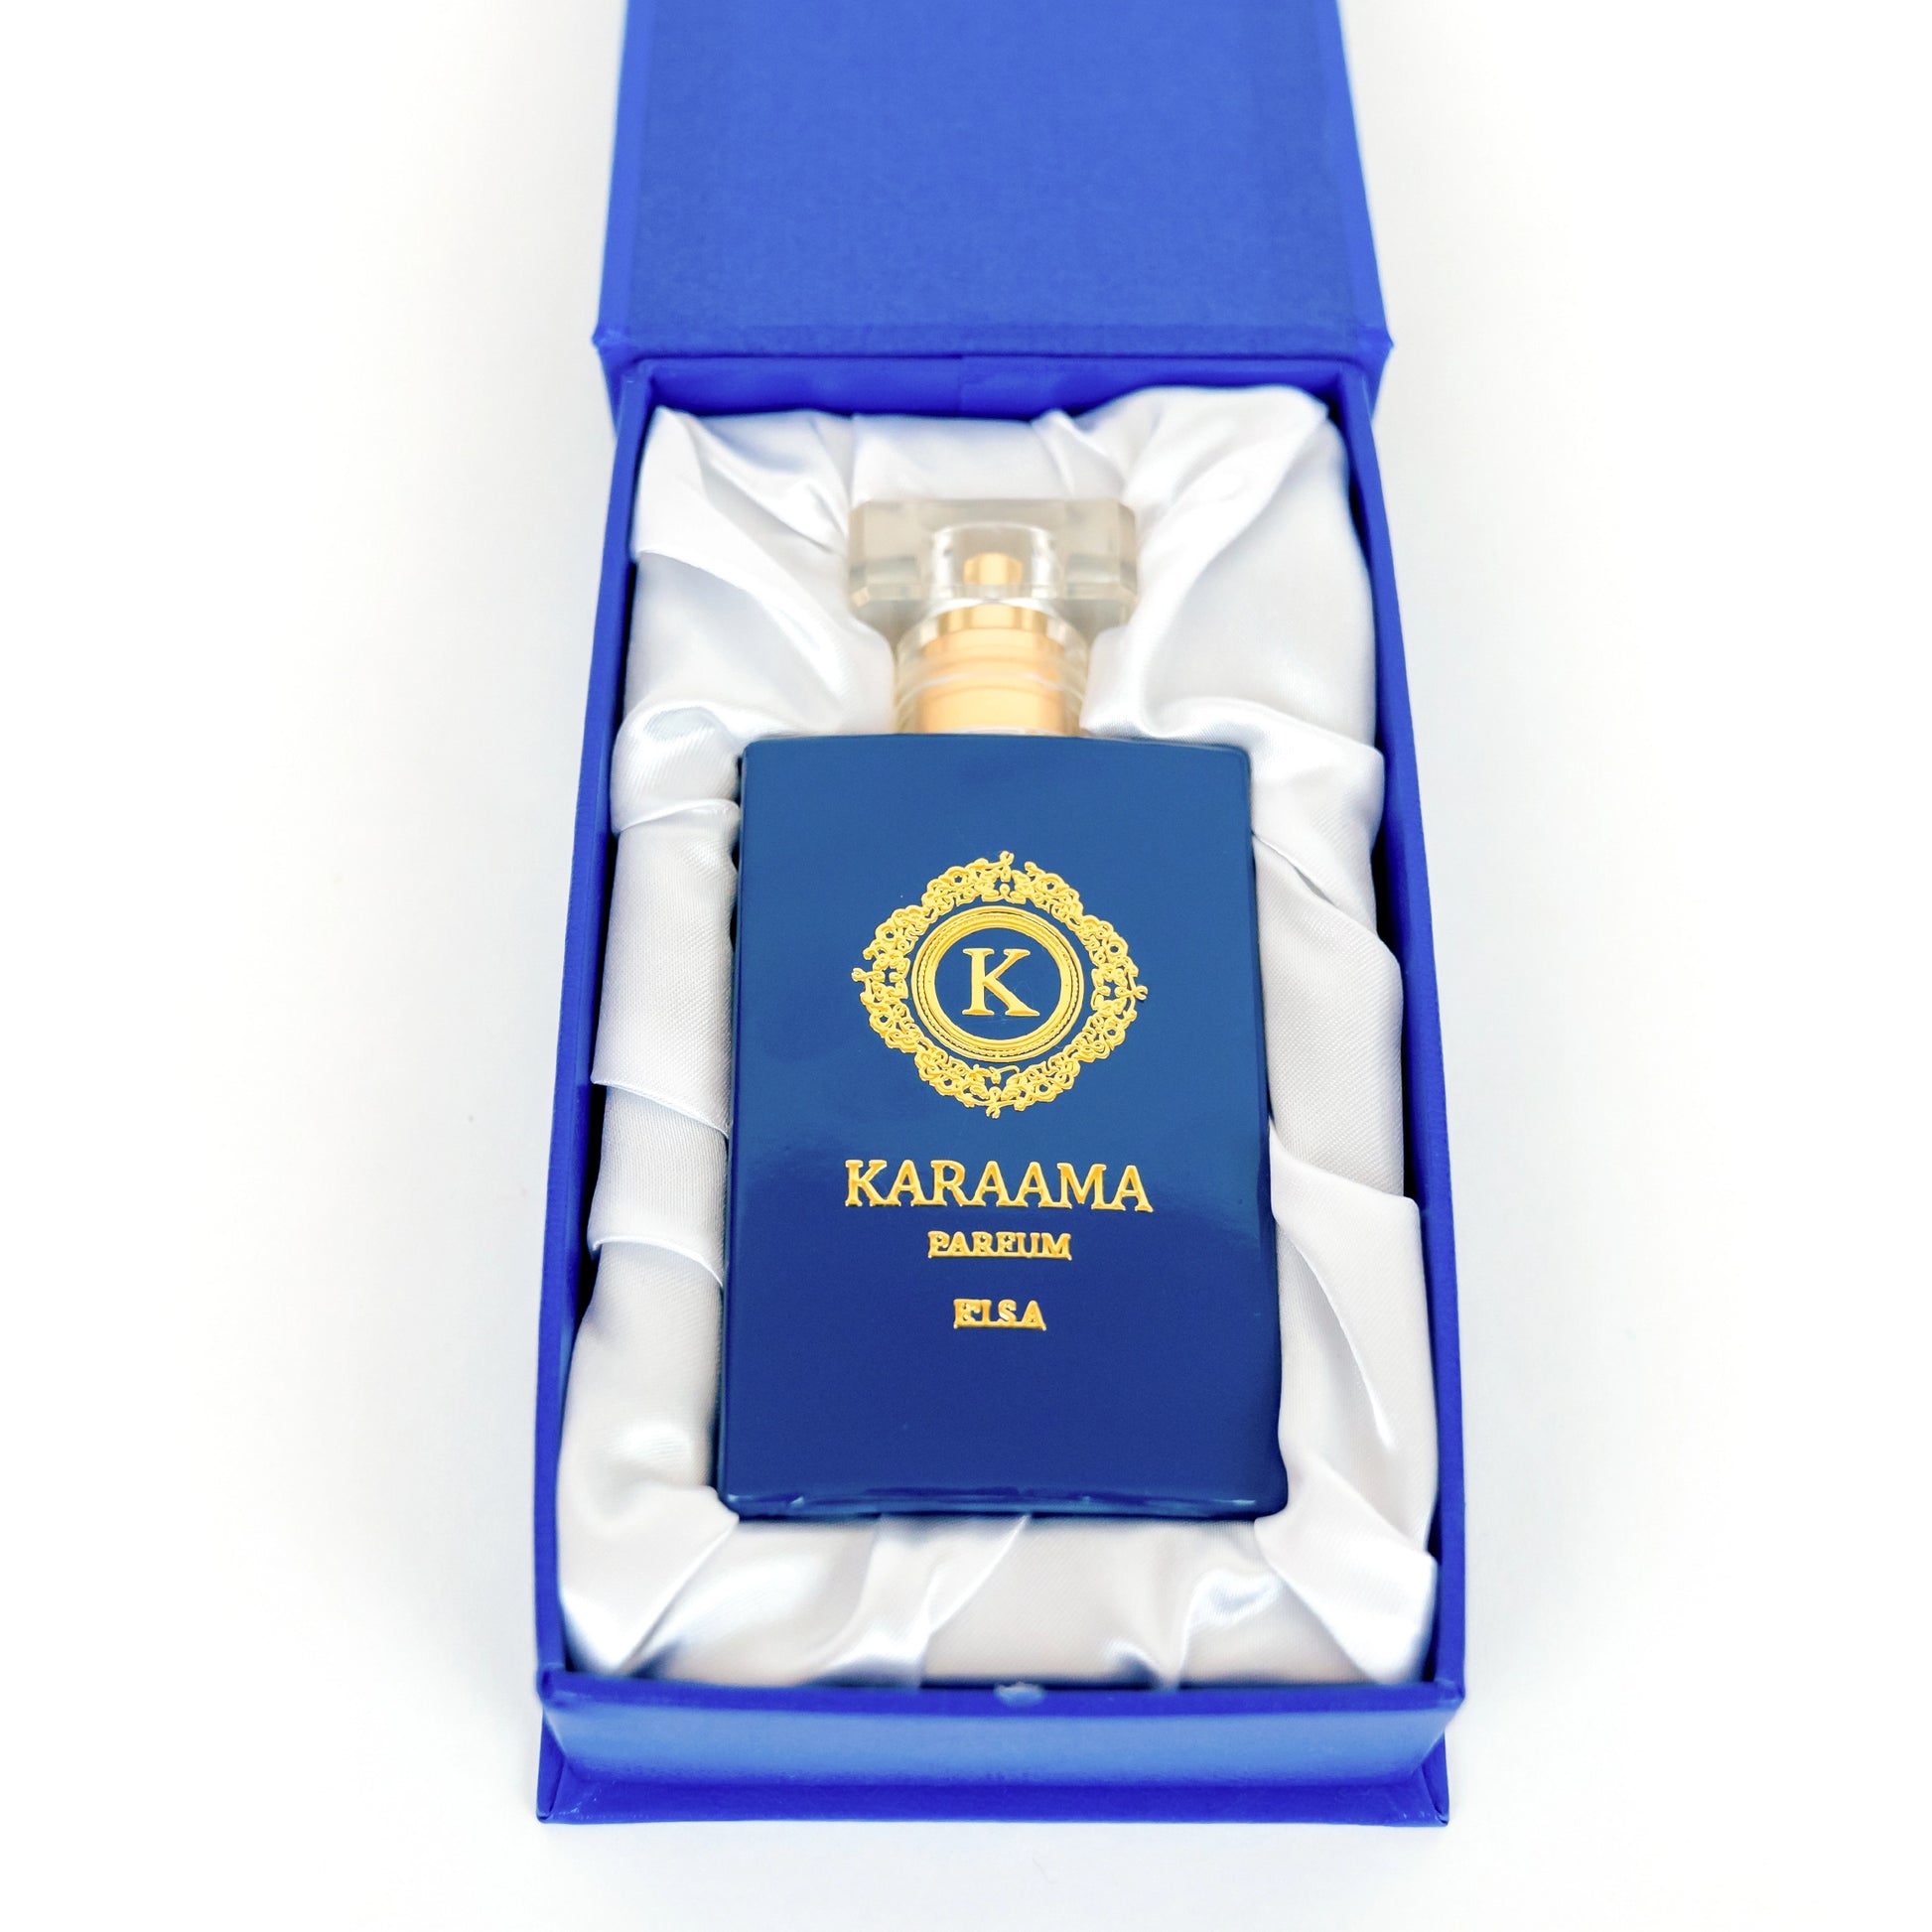 Elegant KARAAMA perfume bottle with regal blue and gold design, presented in a satin-lined luxury box, embodying sophistication and style for a perfect gift item. #luxuryfragrance #elegantgift #perfumebox #sophisticatedstyle #trendingbeauty